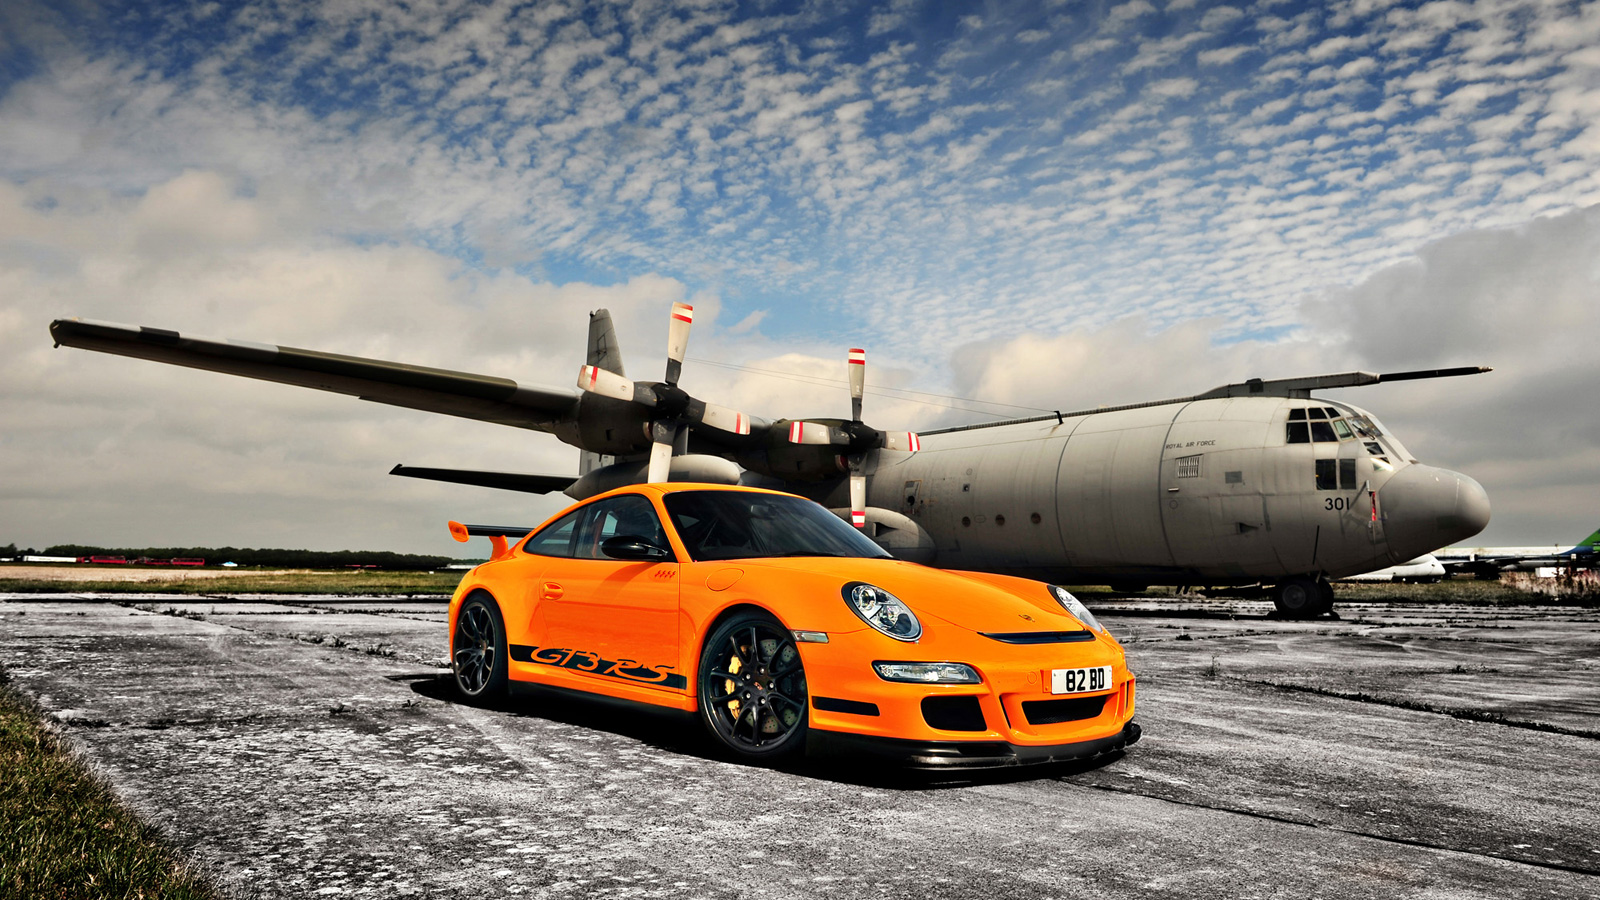 Your Ridiculously Cool Porsche Gt3 Rs Wallpaper Is Here